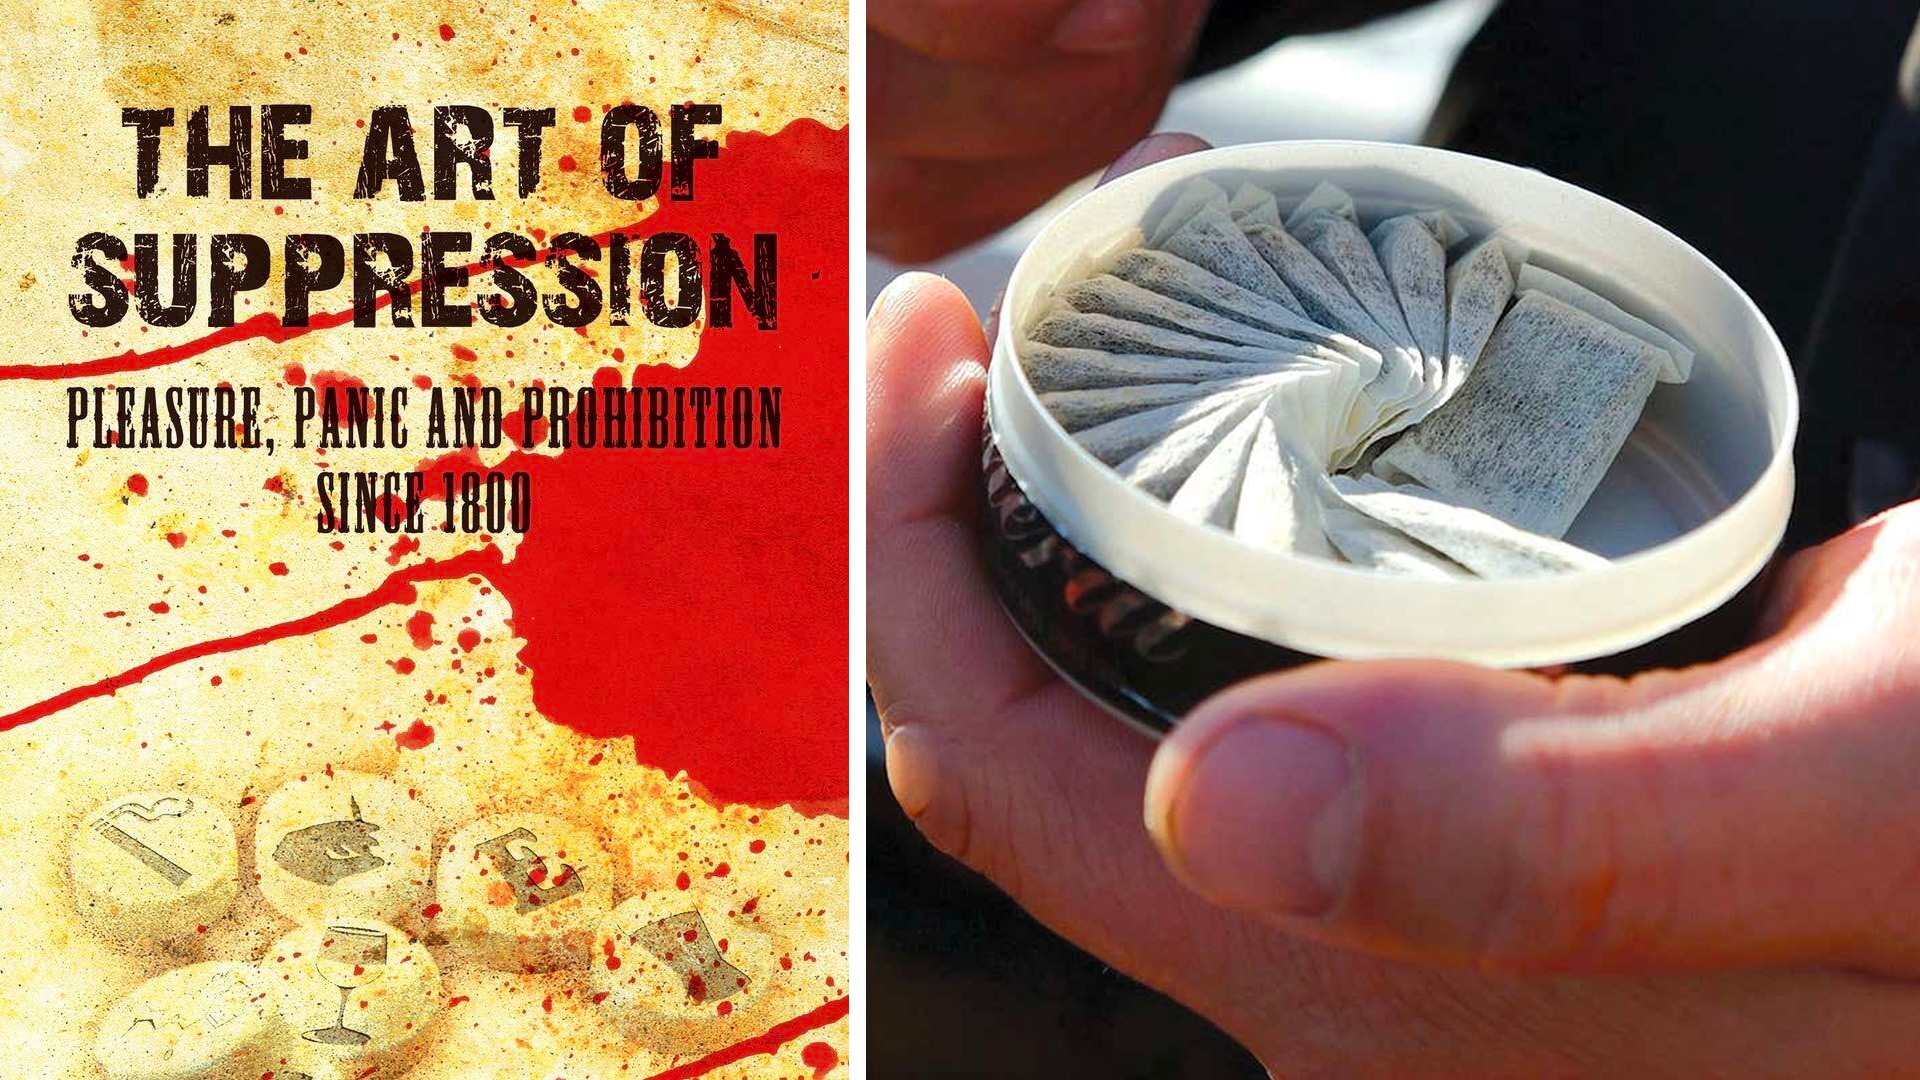 Snus and the Art of Suppression